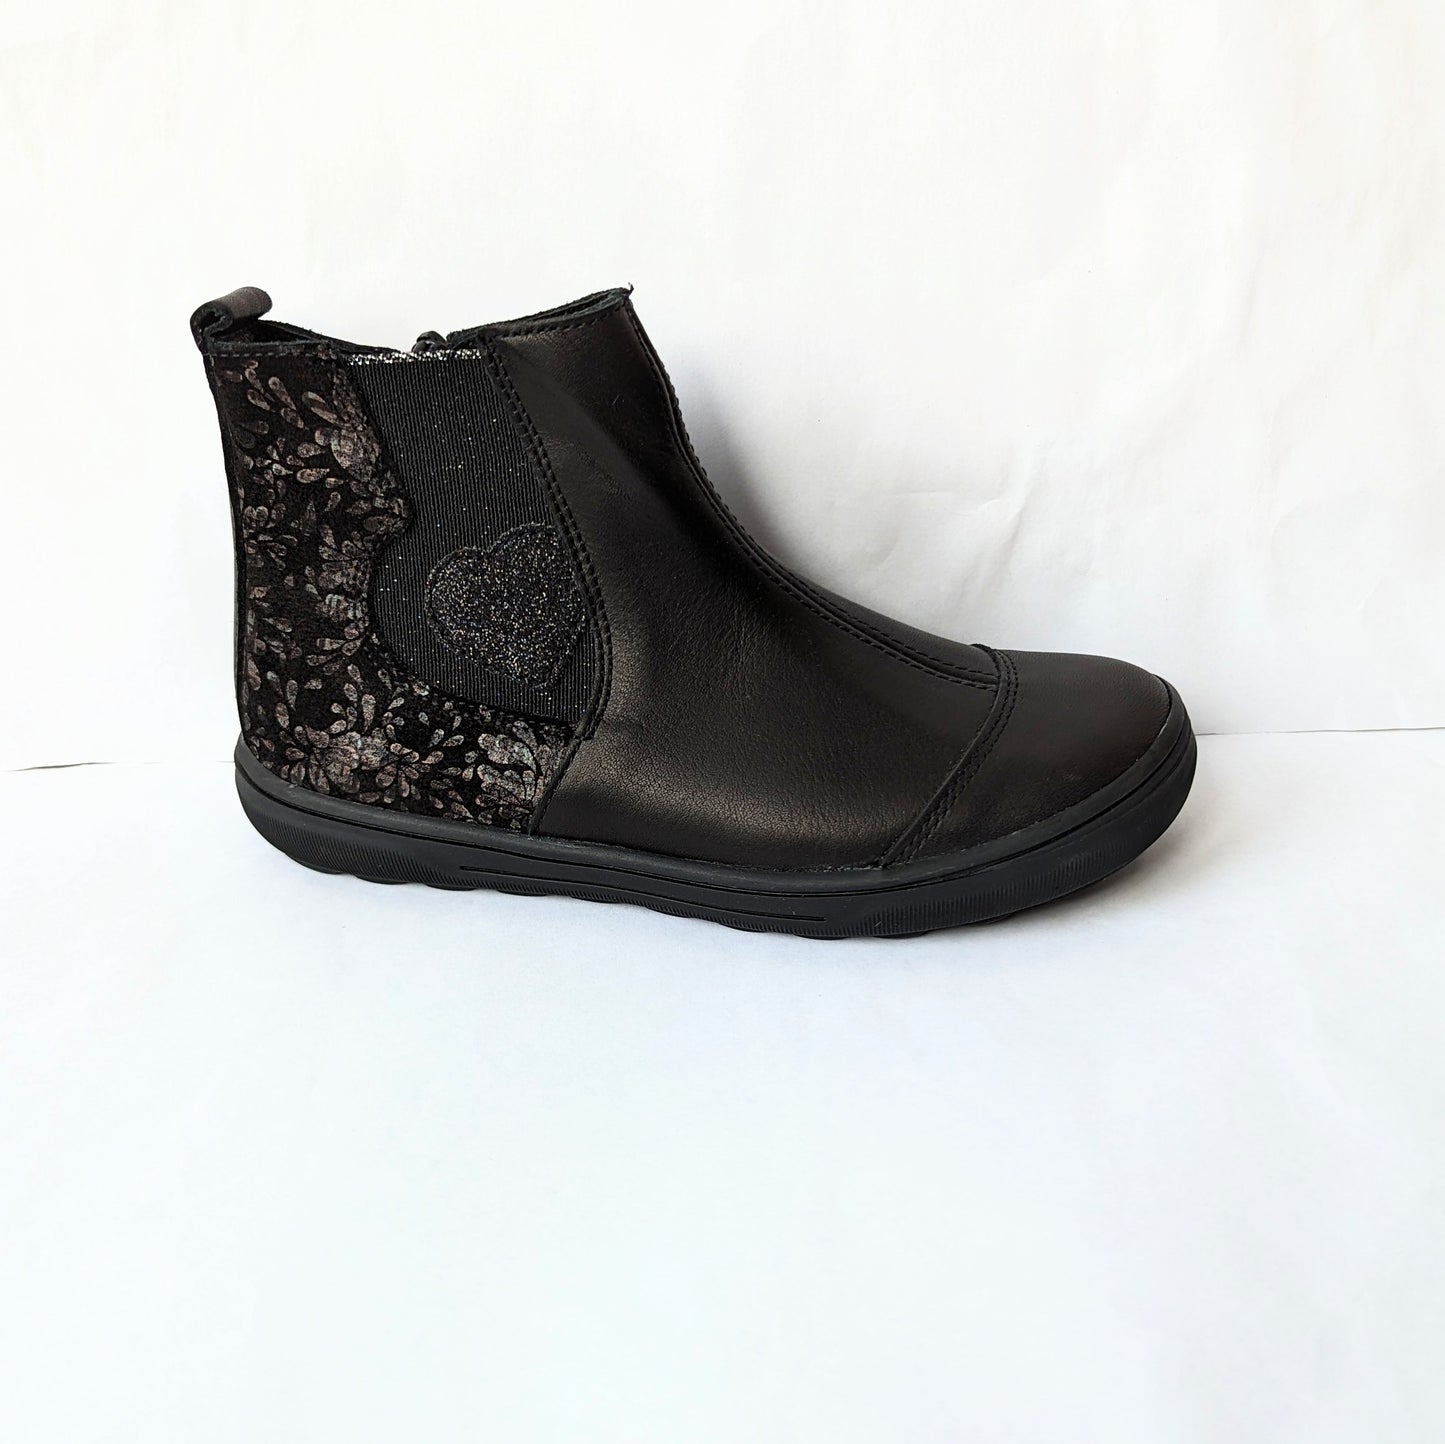 A girls ankle boot by Bopy, style Sonate, in black leather/black gold print nubuck with elastic gusset and zip fastening. Right side view.